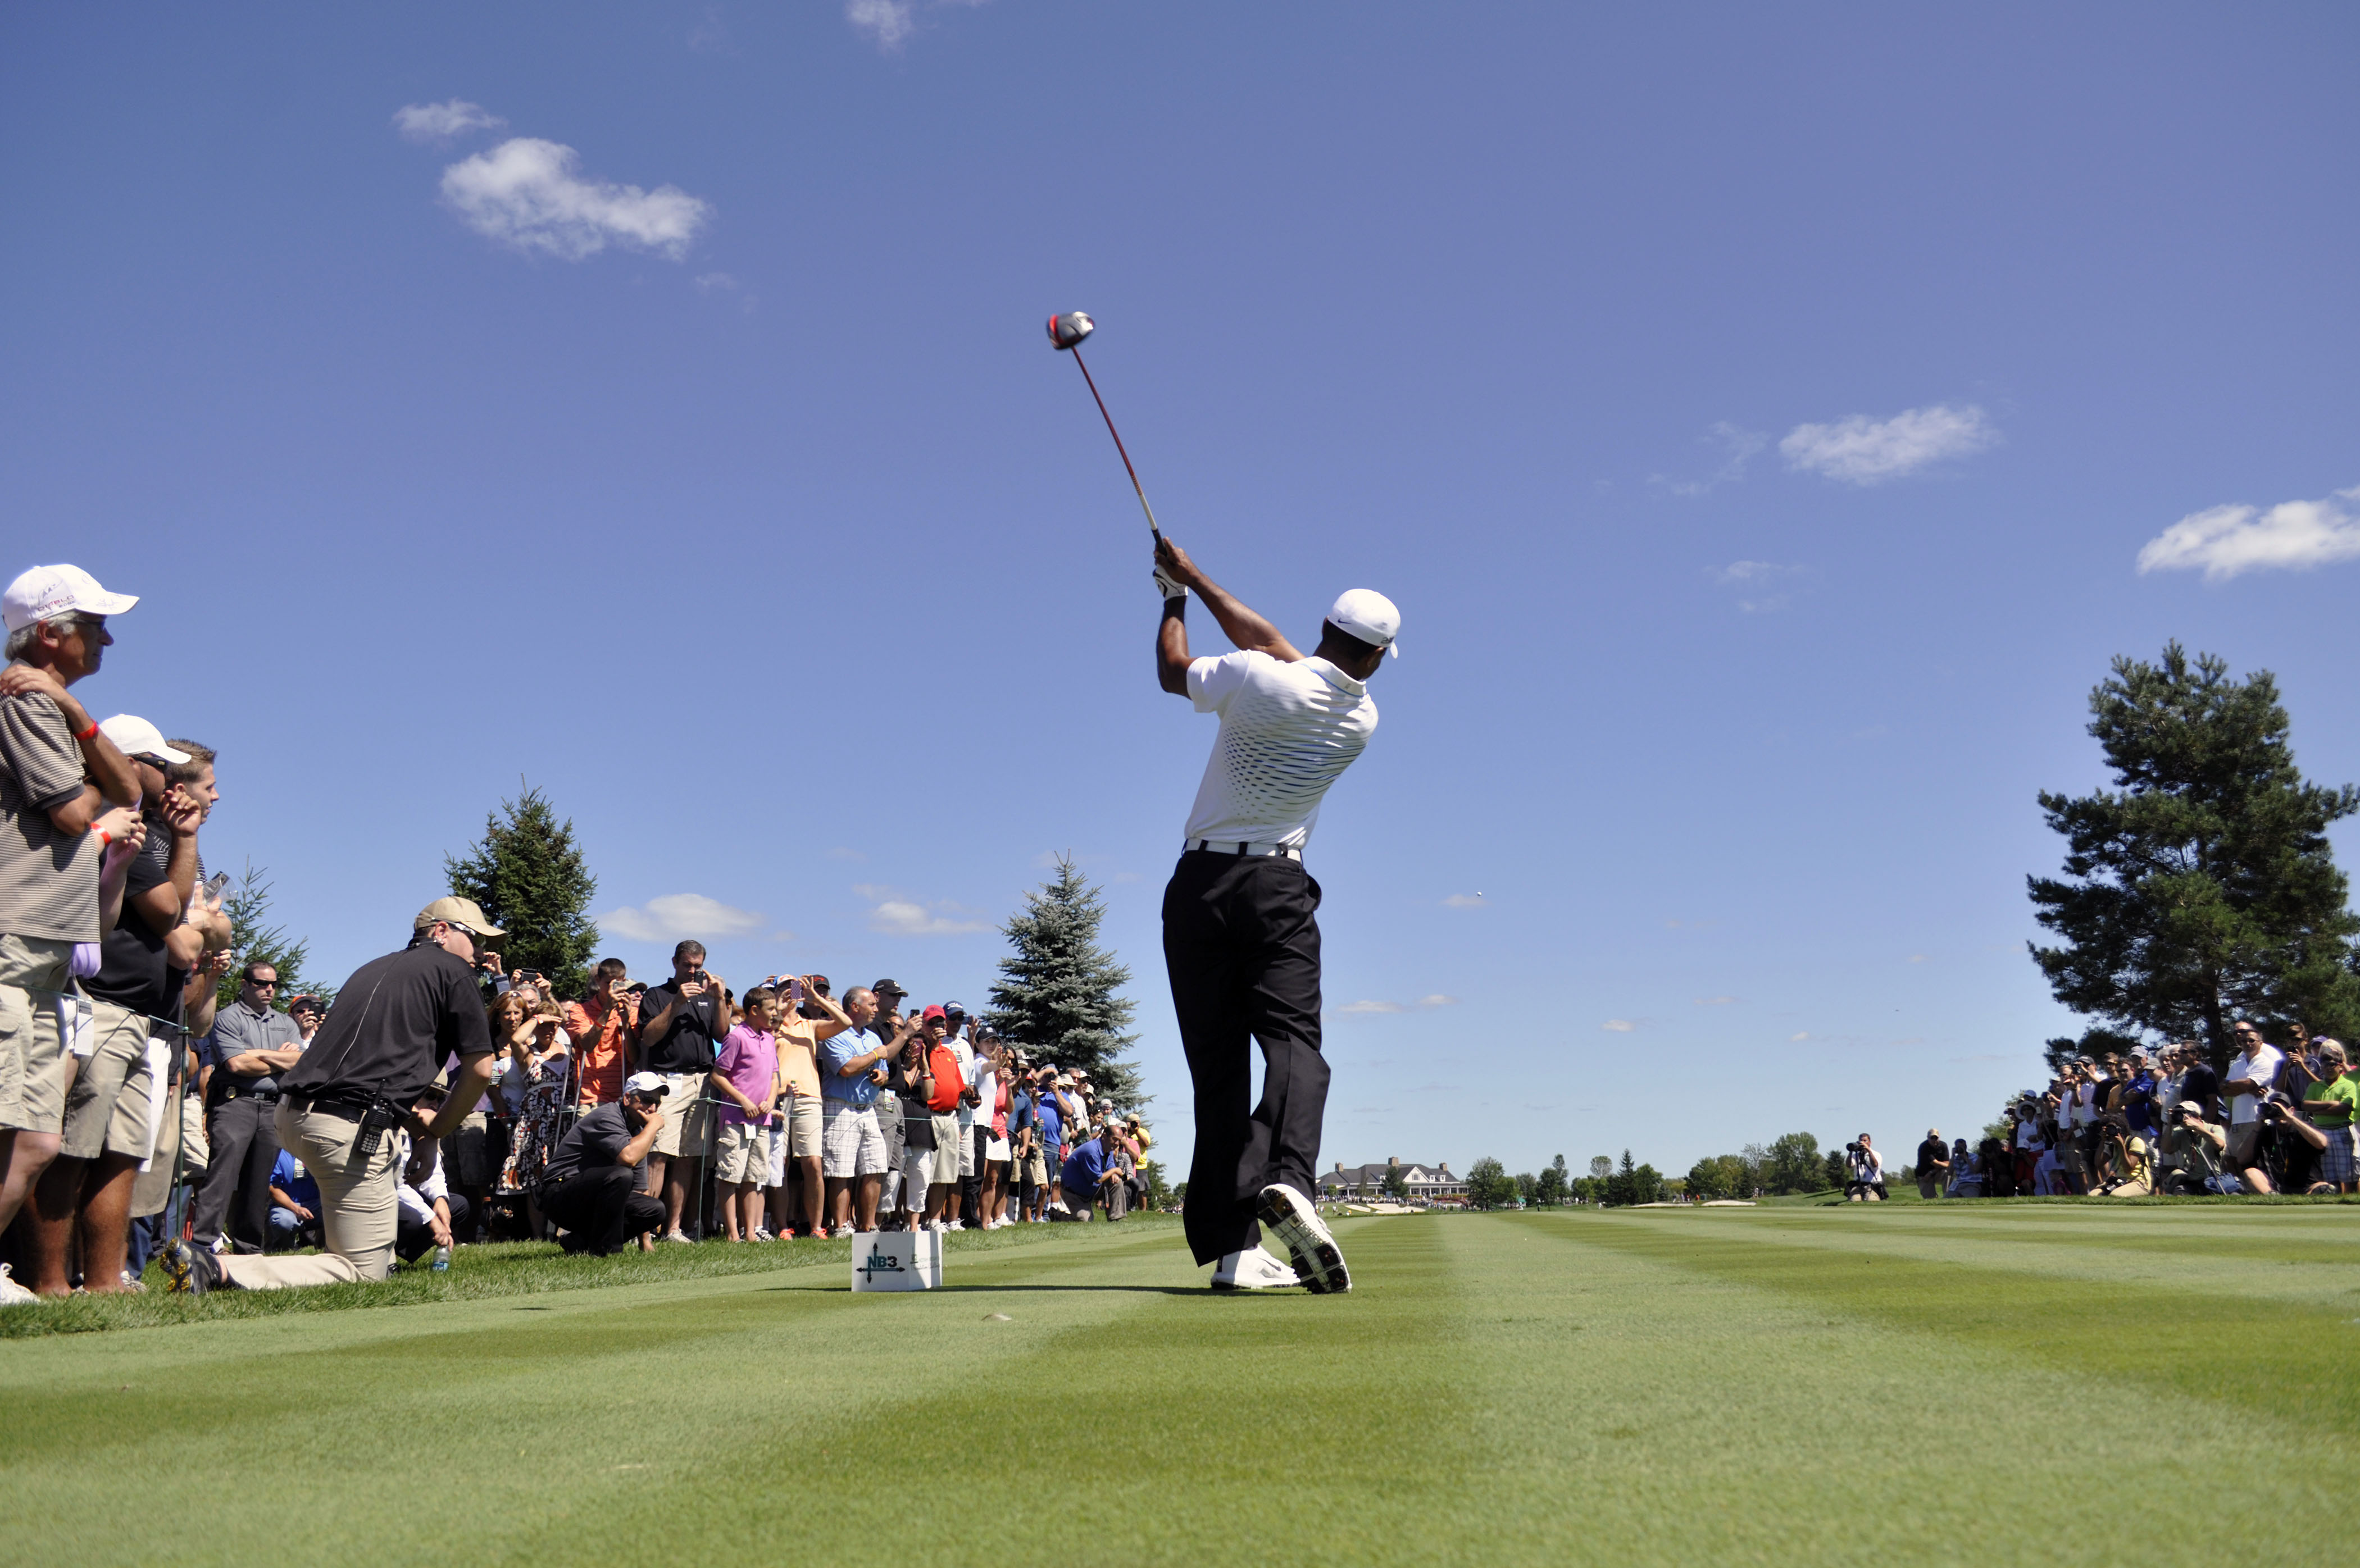 After year absence, TPC Boston welcomes Tiger's return - Newsfeed